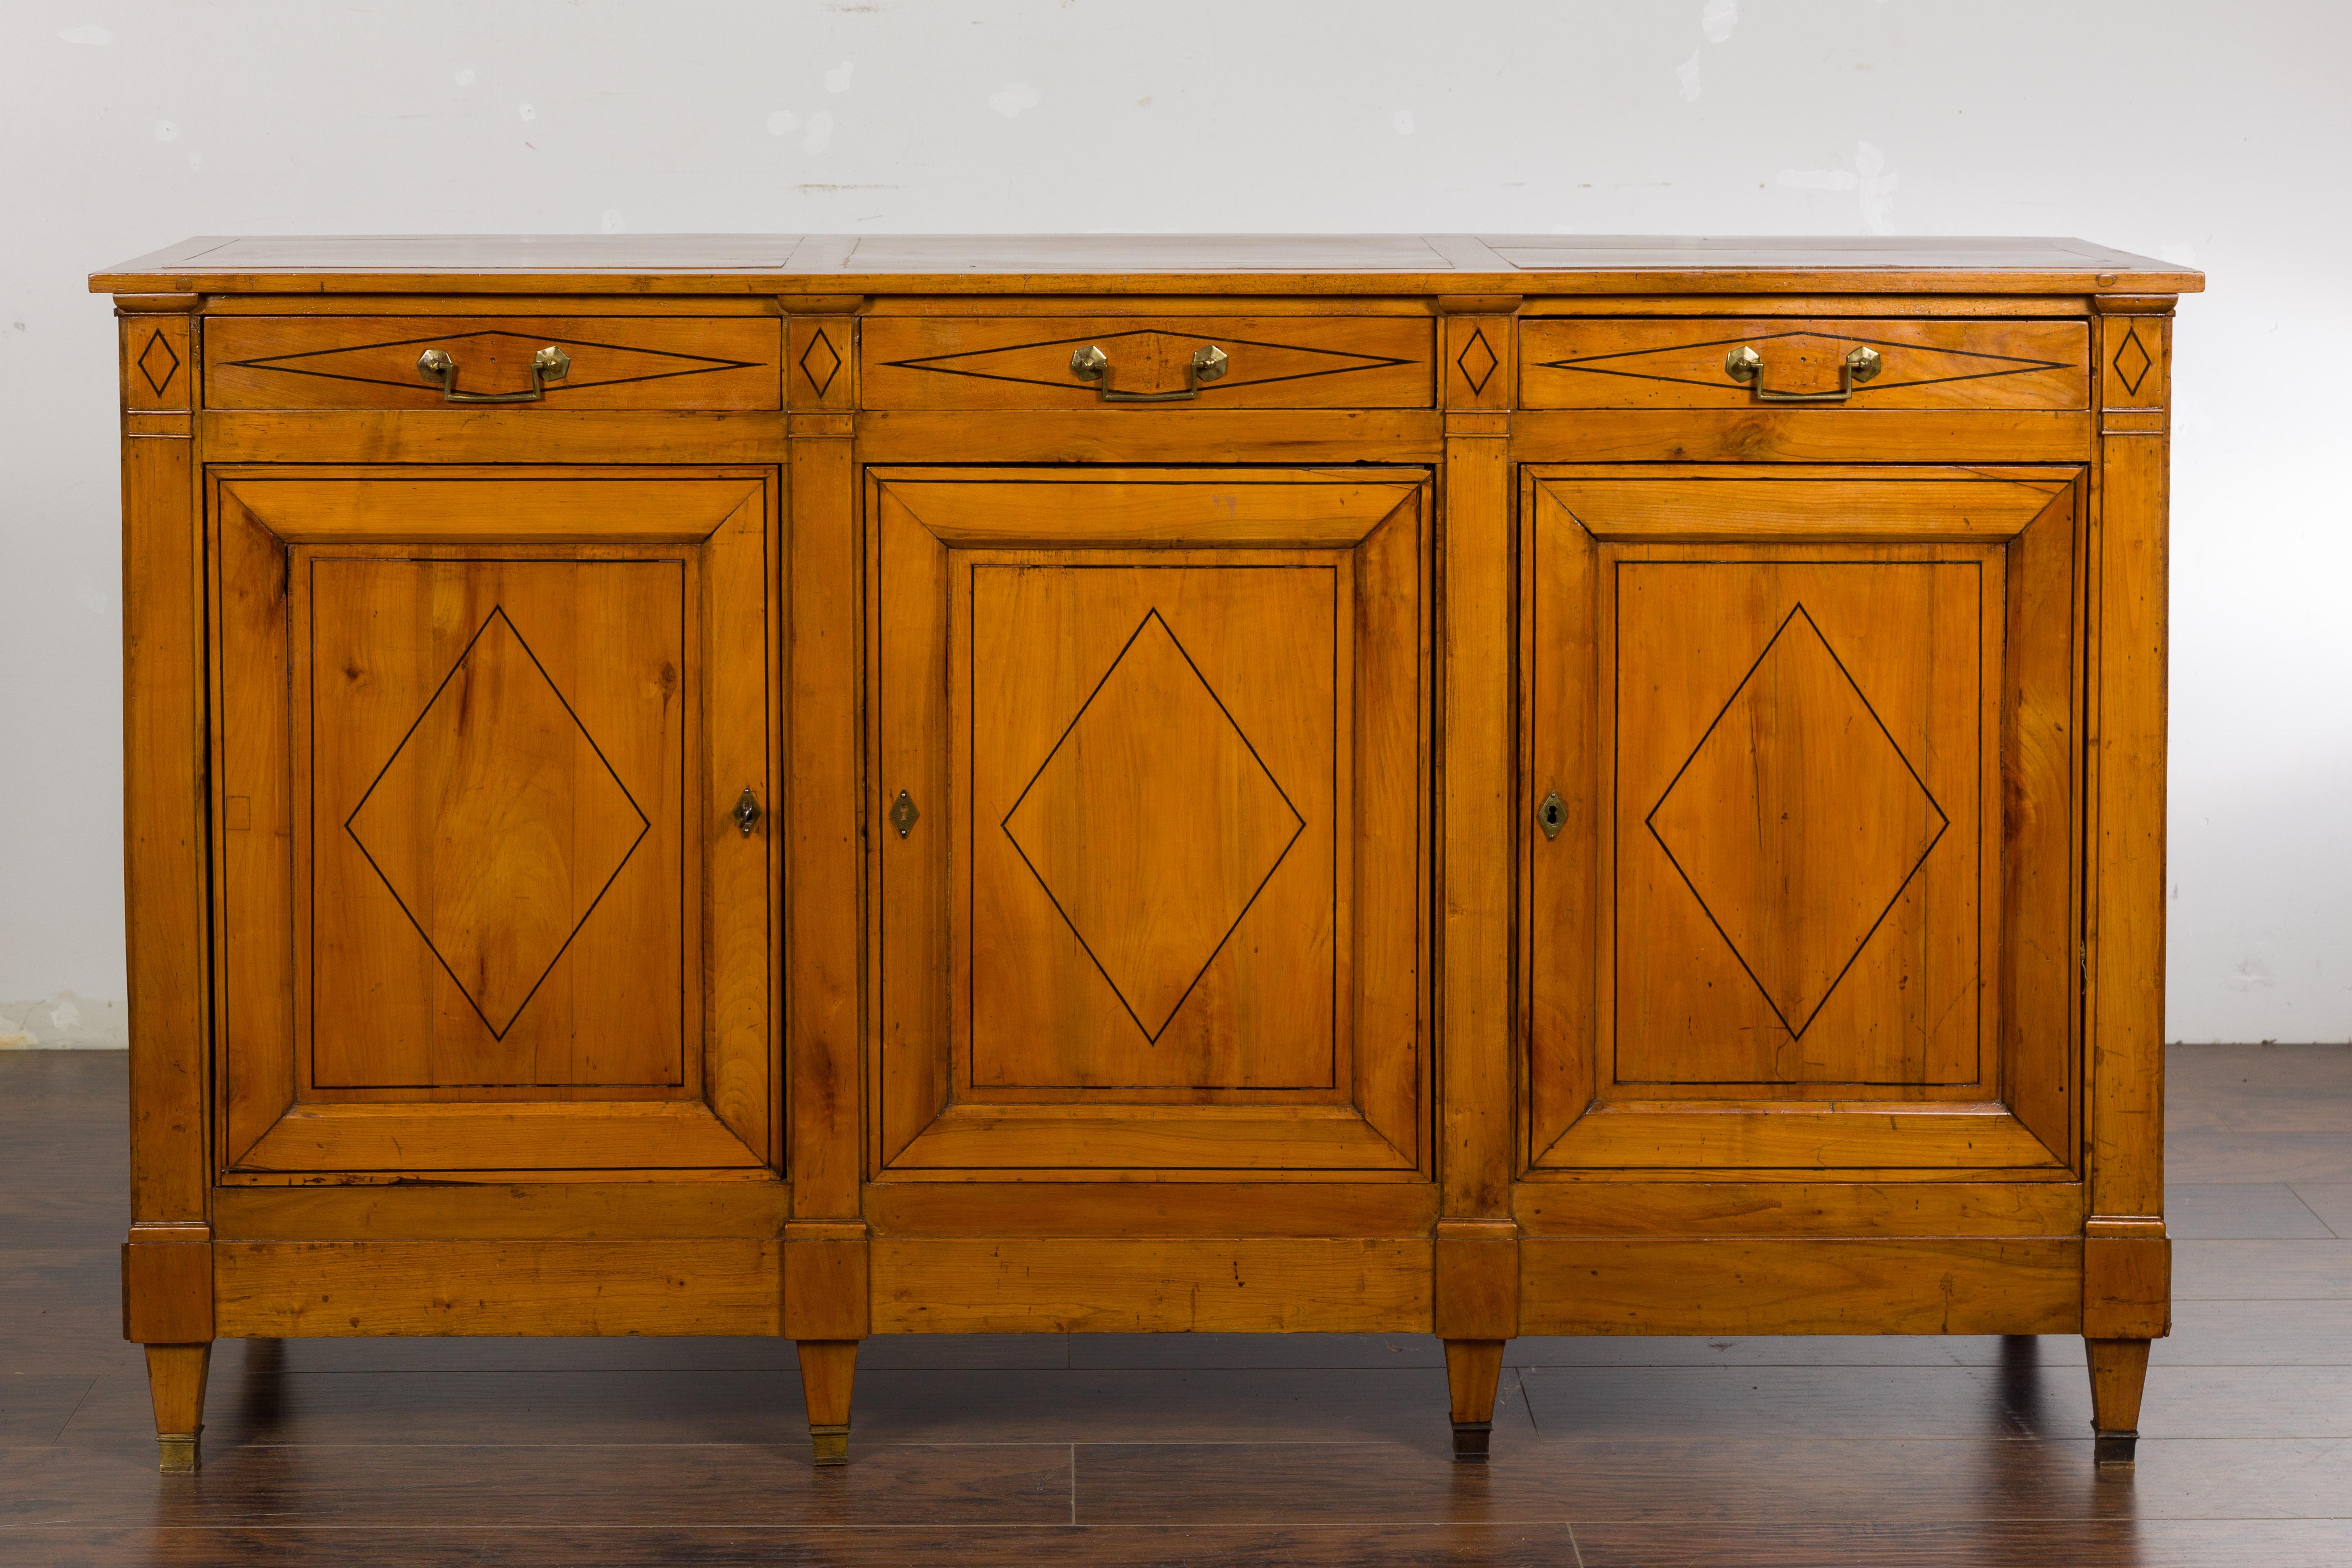 A French walnut enfilade from the 19th century with three drawers over three doors, black inlaid diamond motifs, brass hardware and tapered feet. Introduce a touch of French elegance to your living space with this exquisite walnut enfilade from the